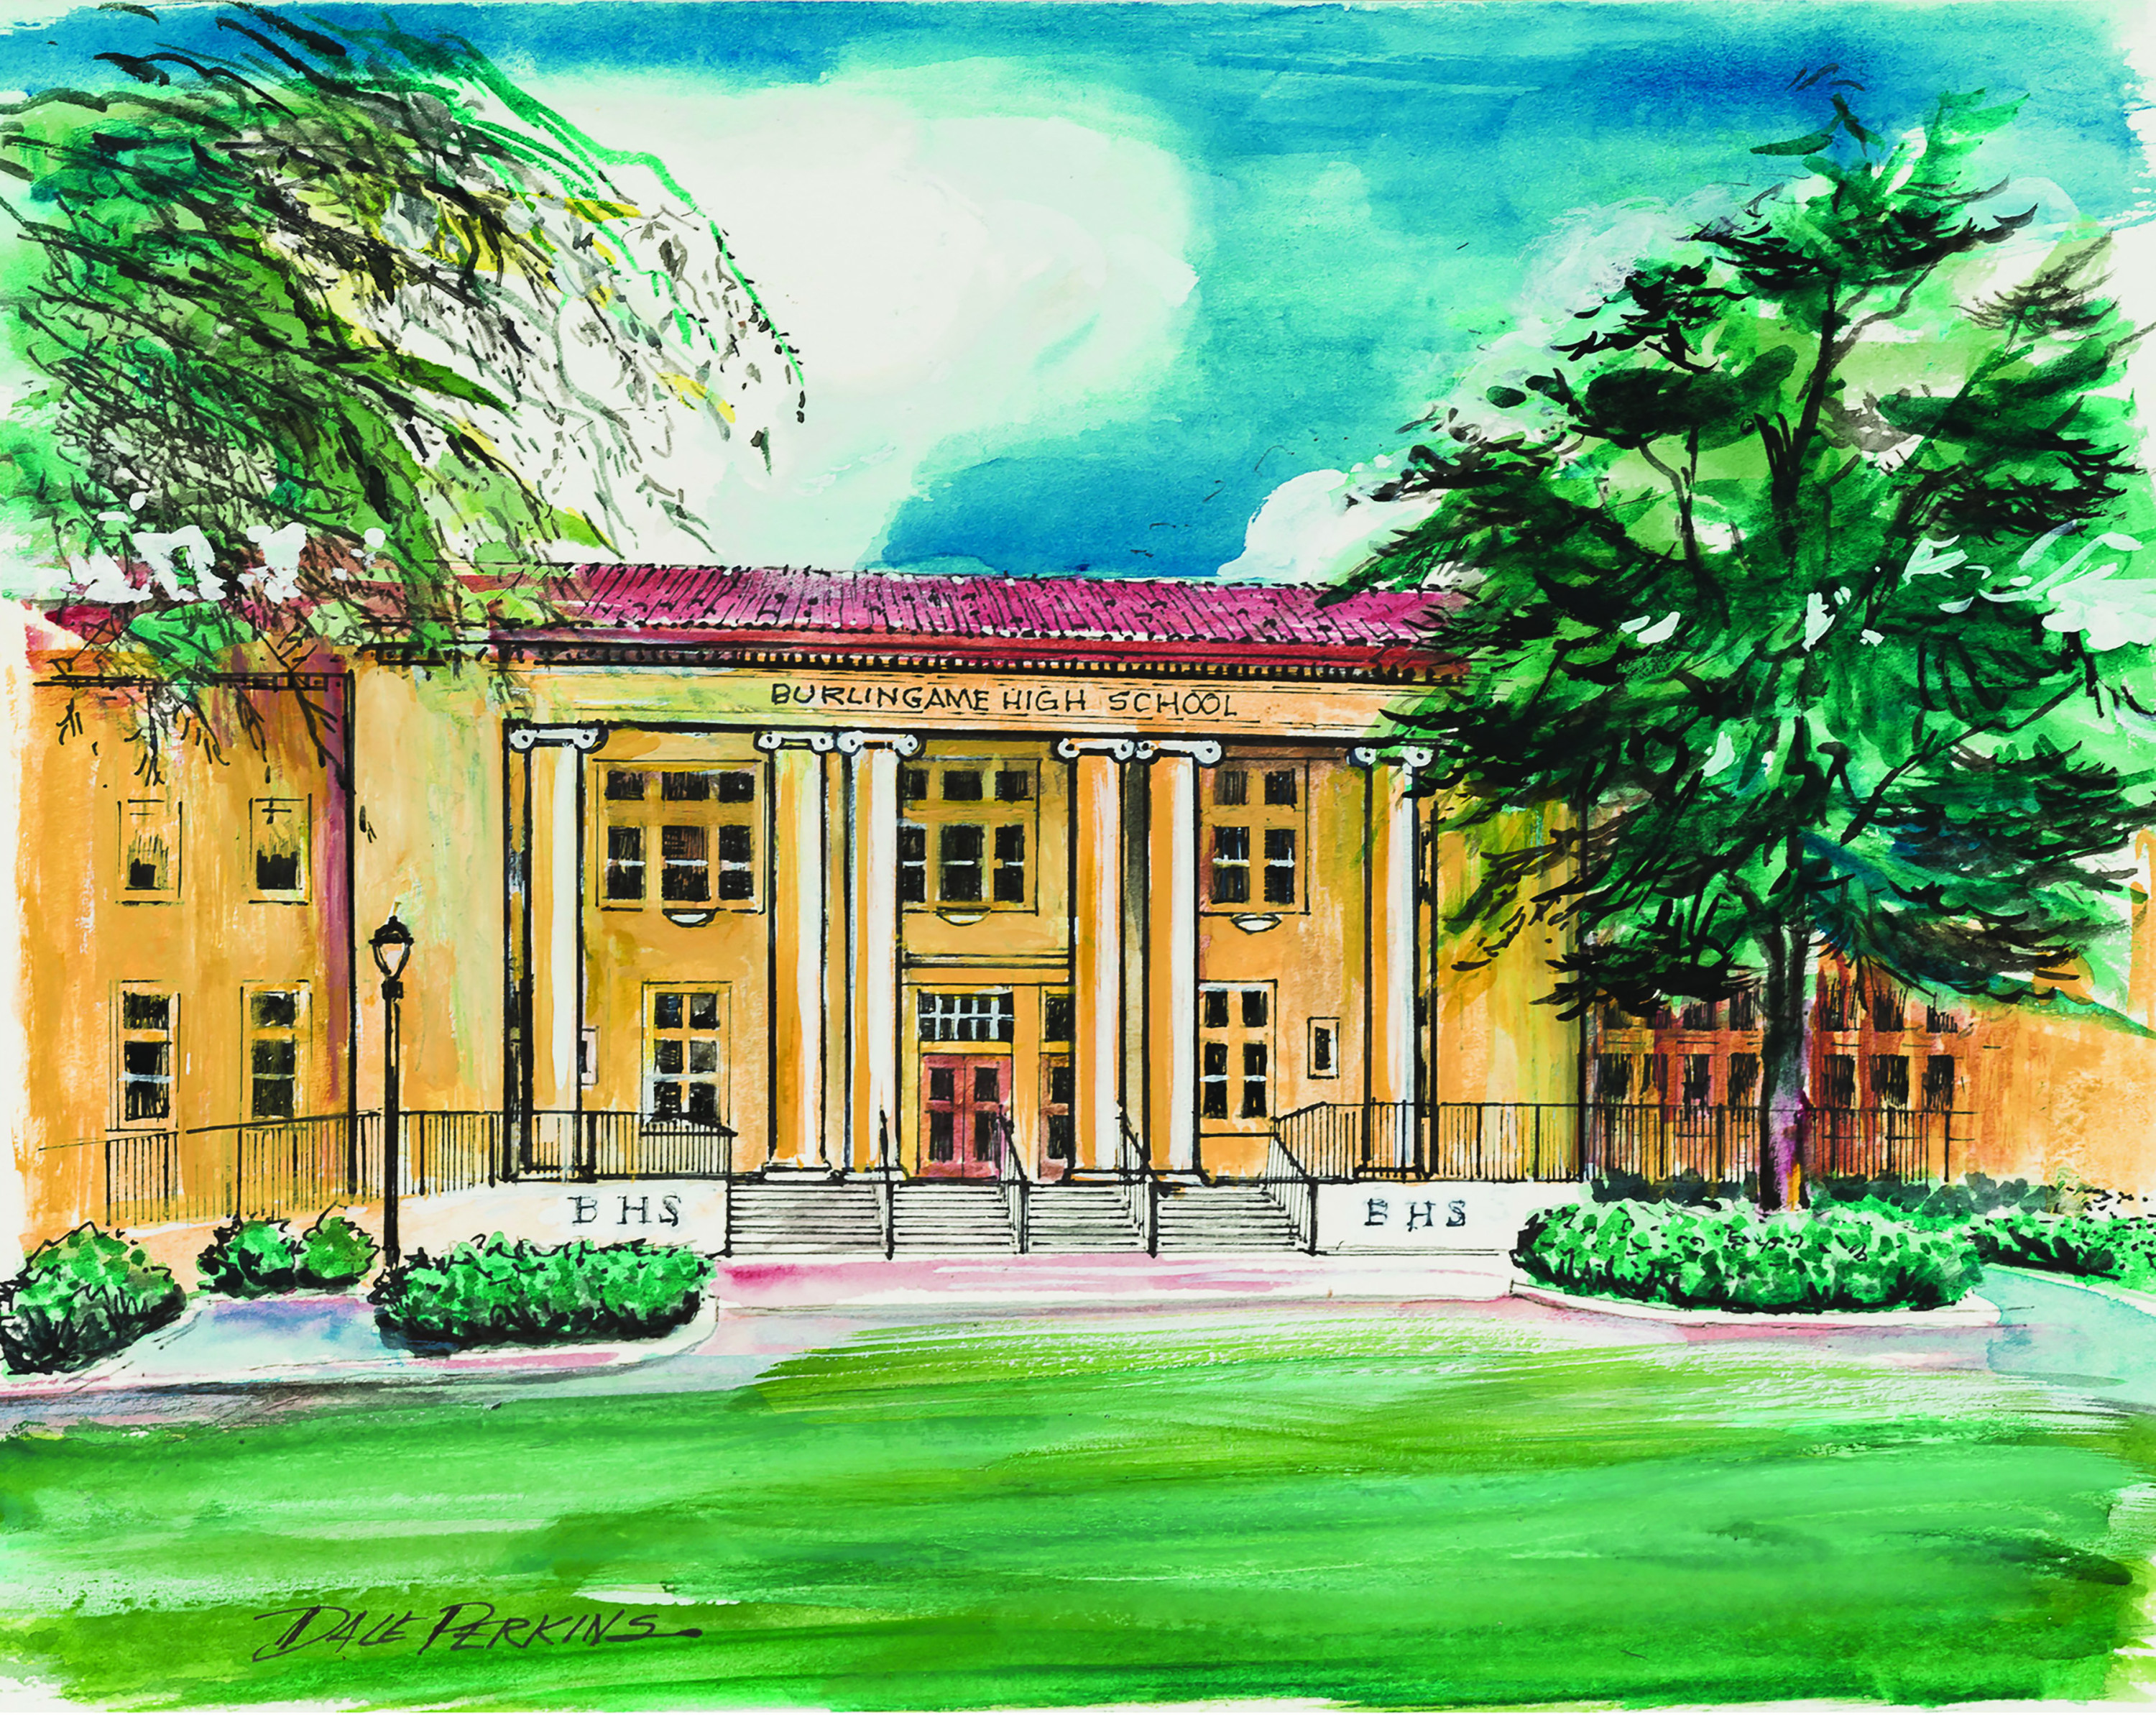 Illustration of Burlingame High School by Dale Perkins